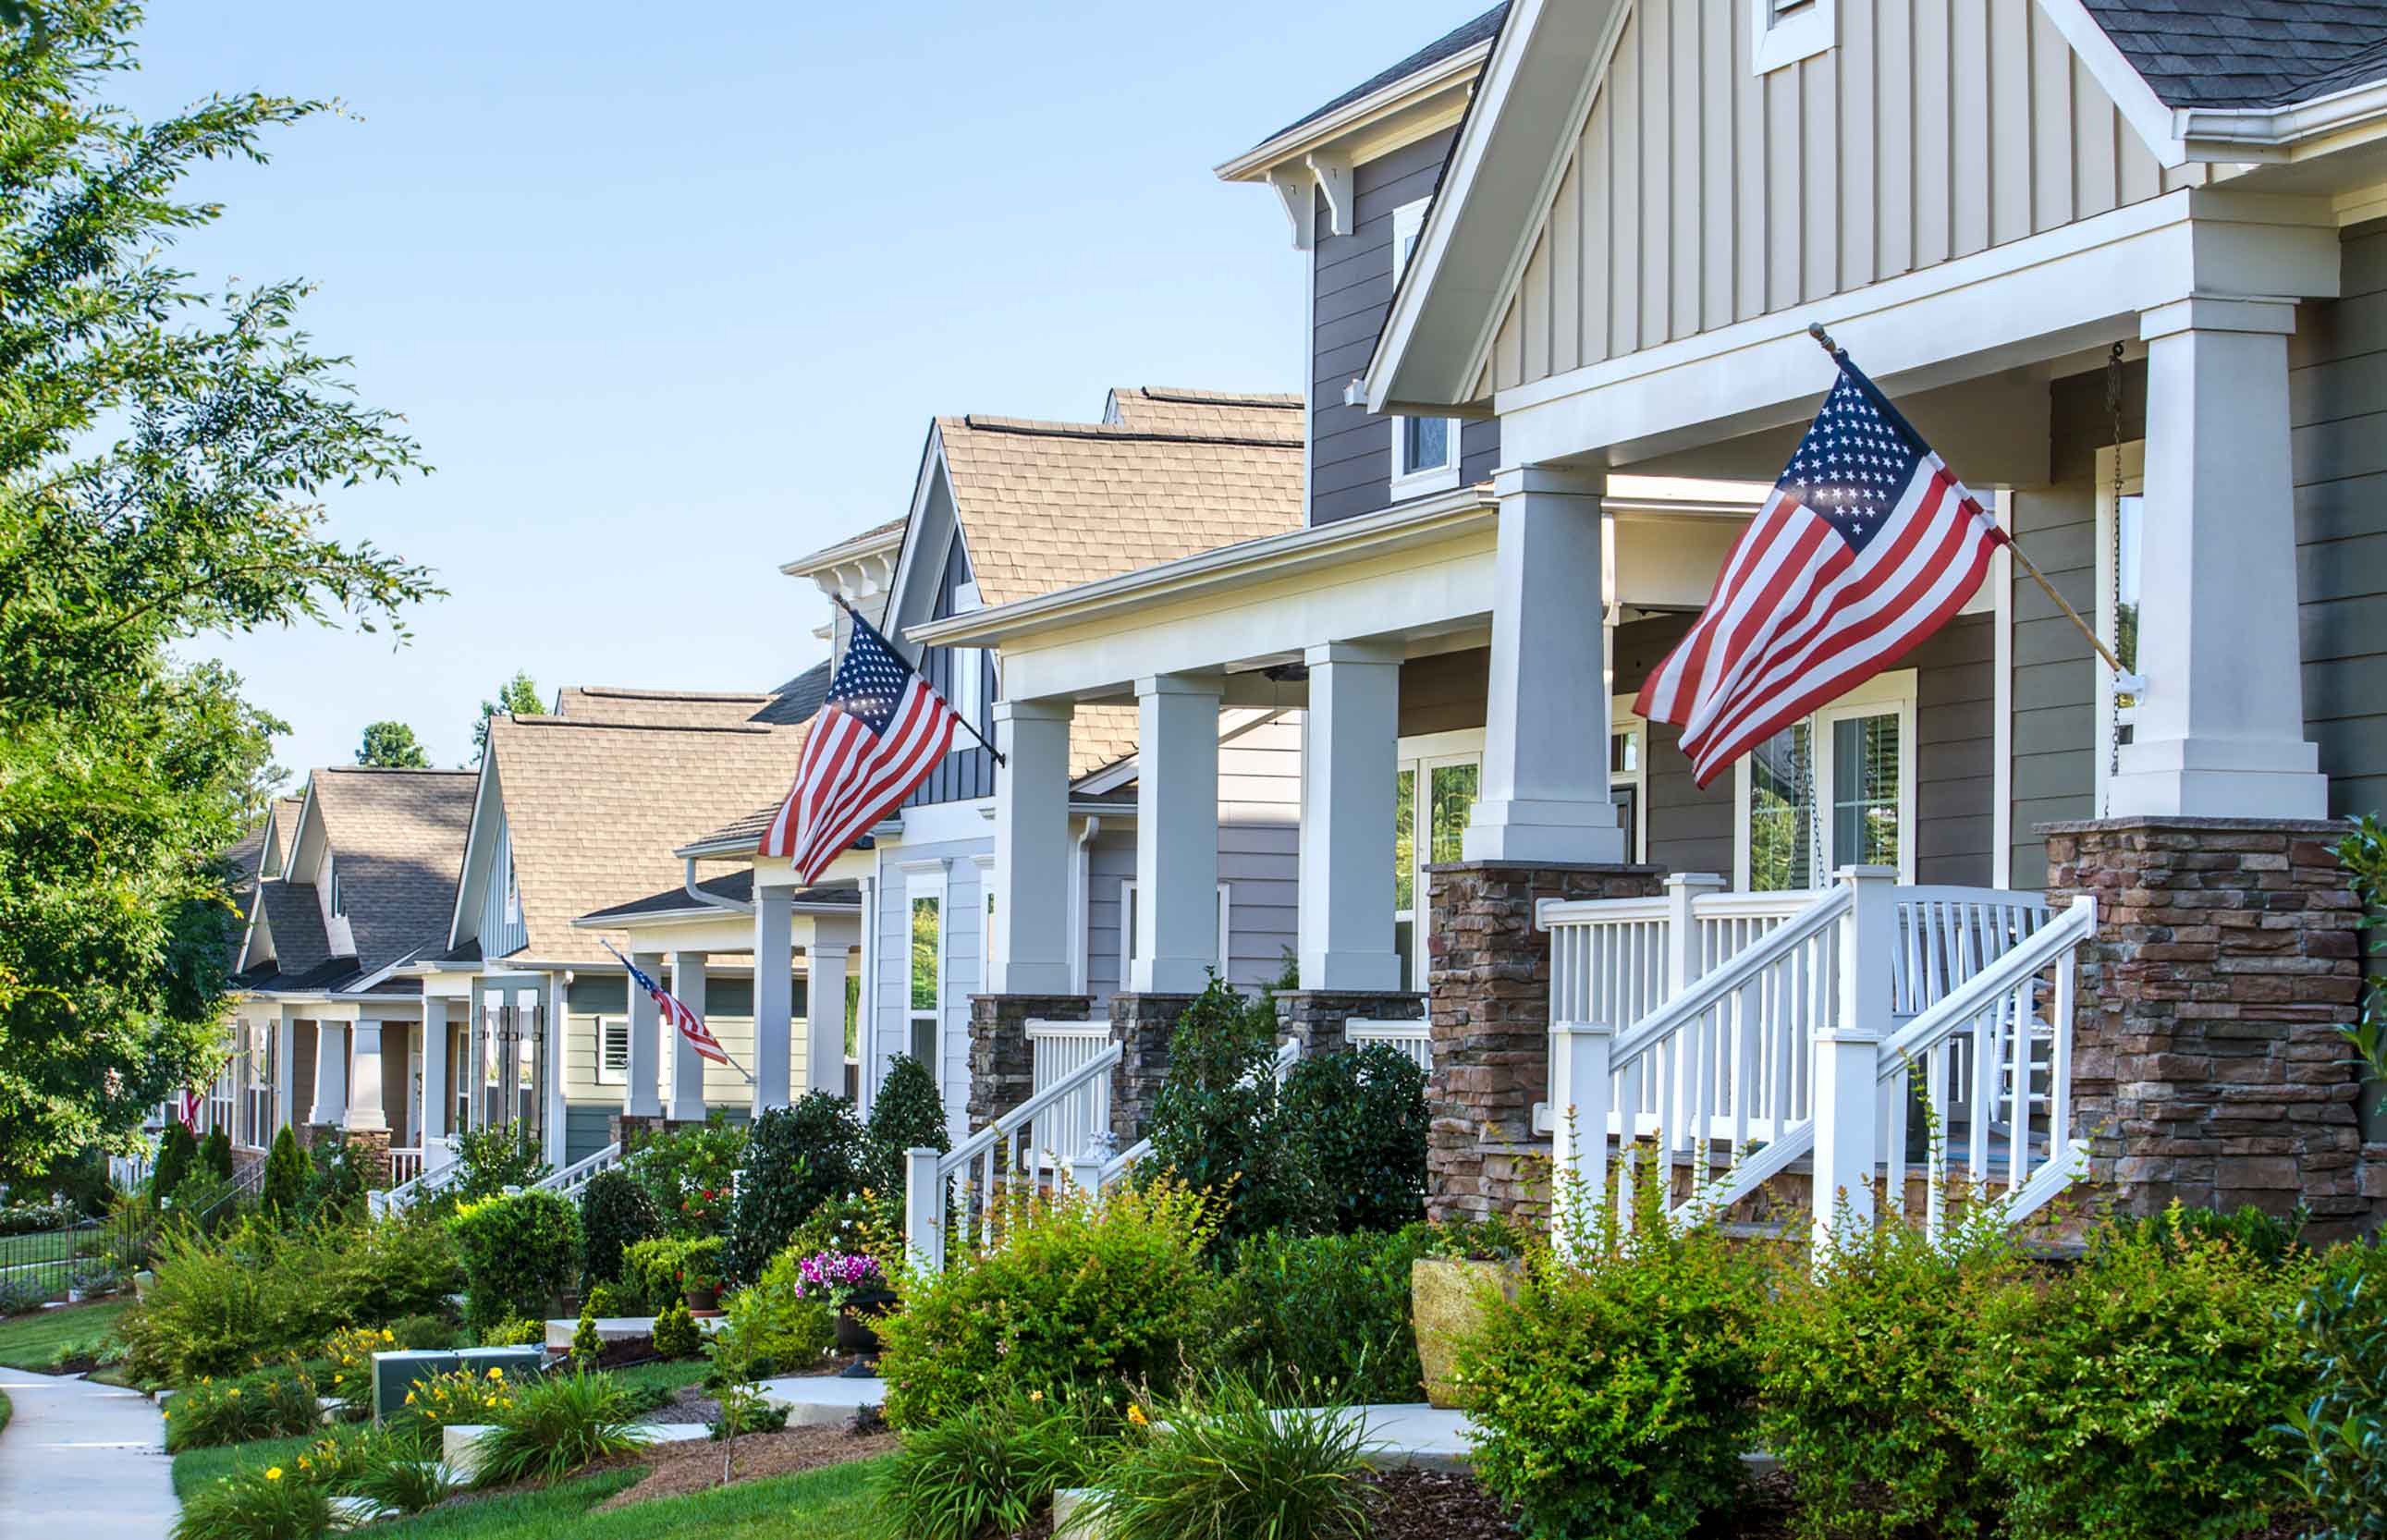 Millennials are increasingly becoming homeowners, but in some cities more than others.